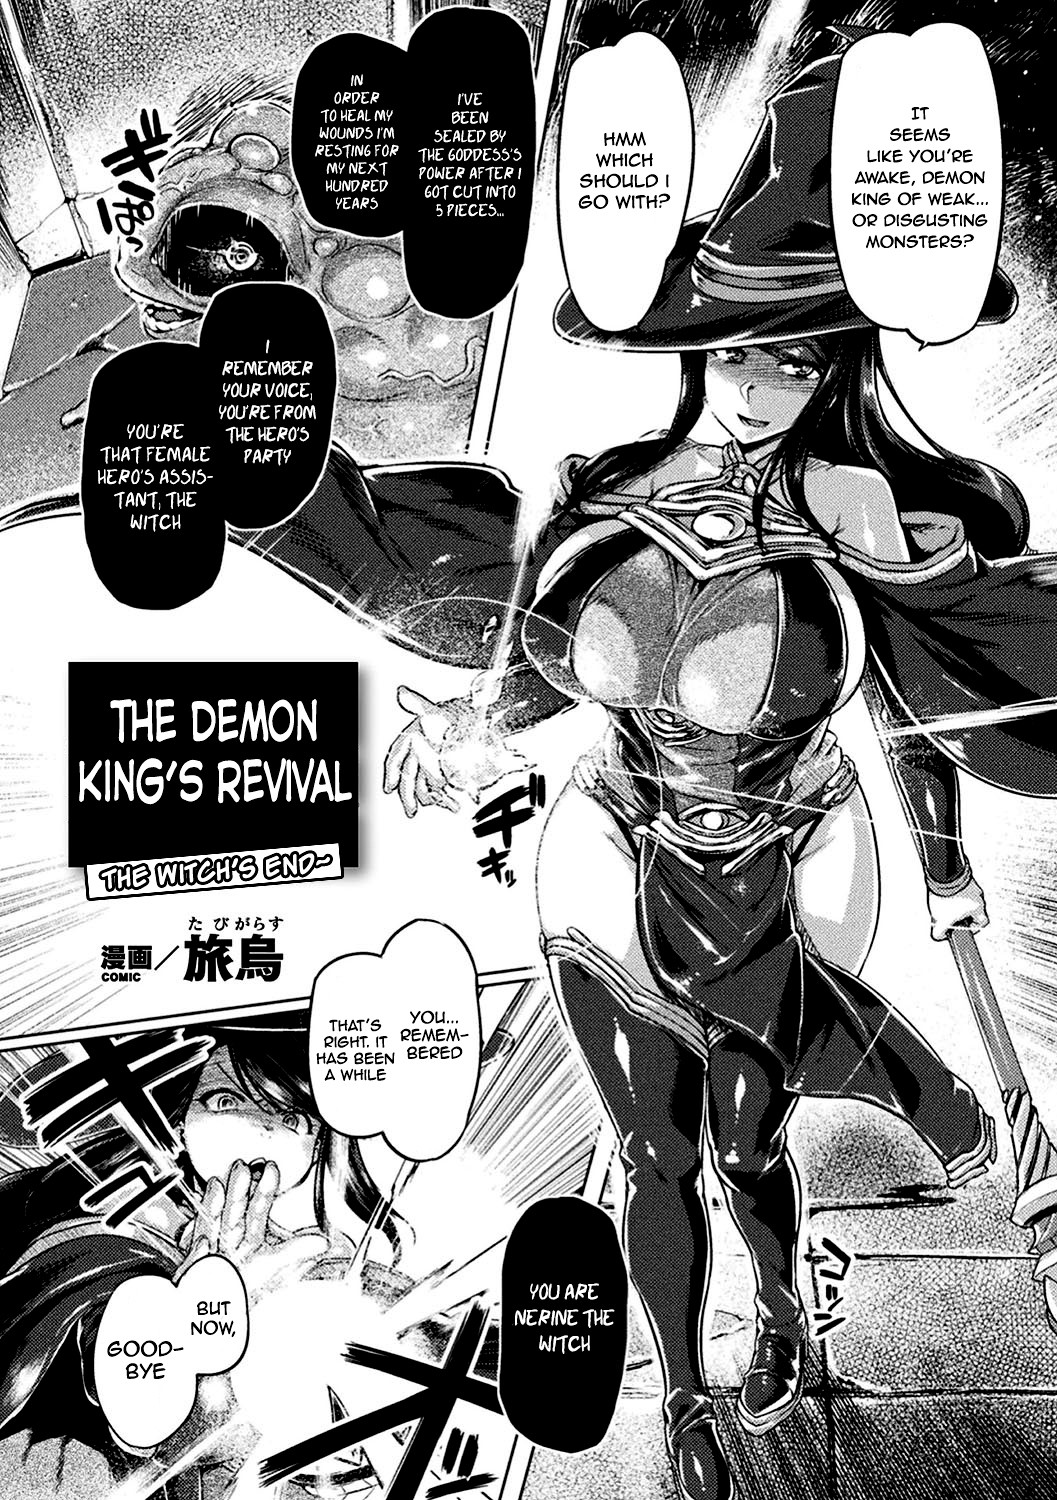 Hentai Manga Comic-The Demon King's Revival ~ Or the Witch's End-Read-2